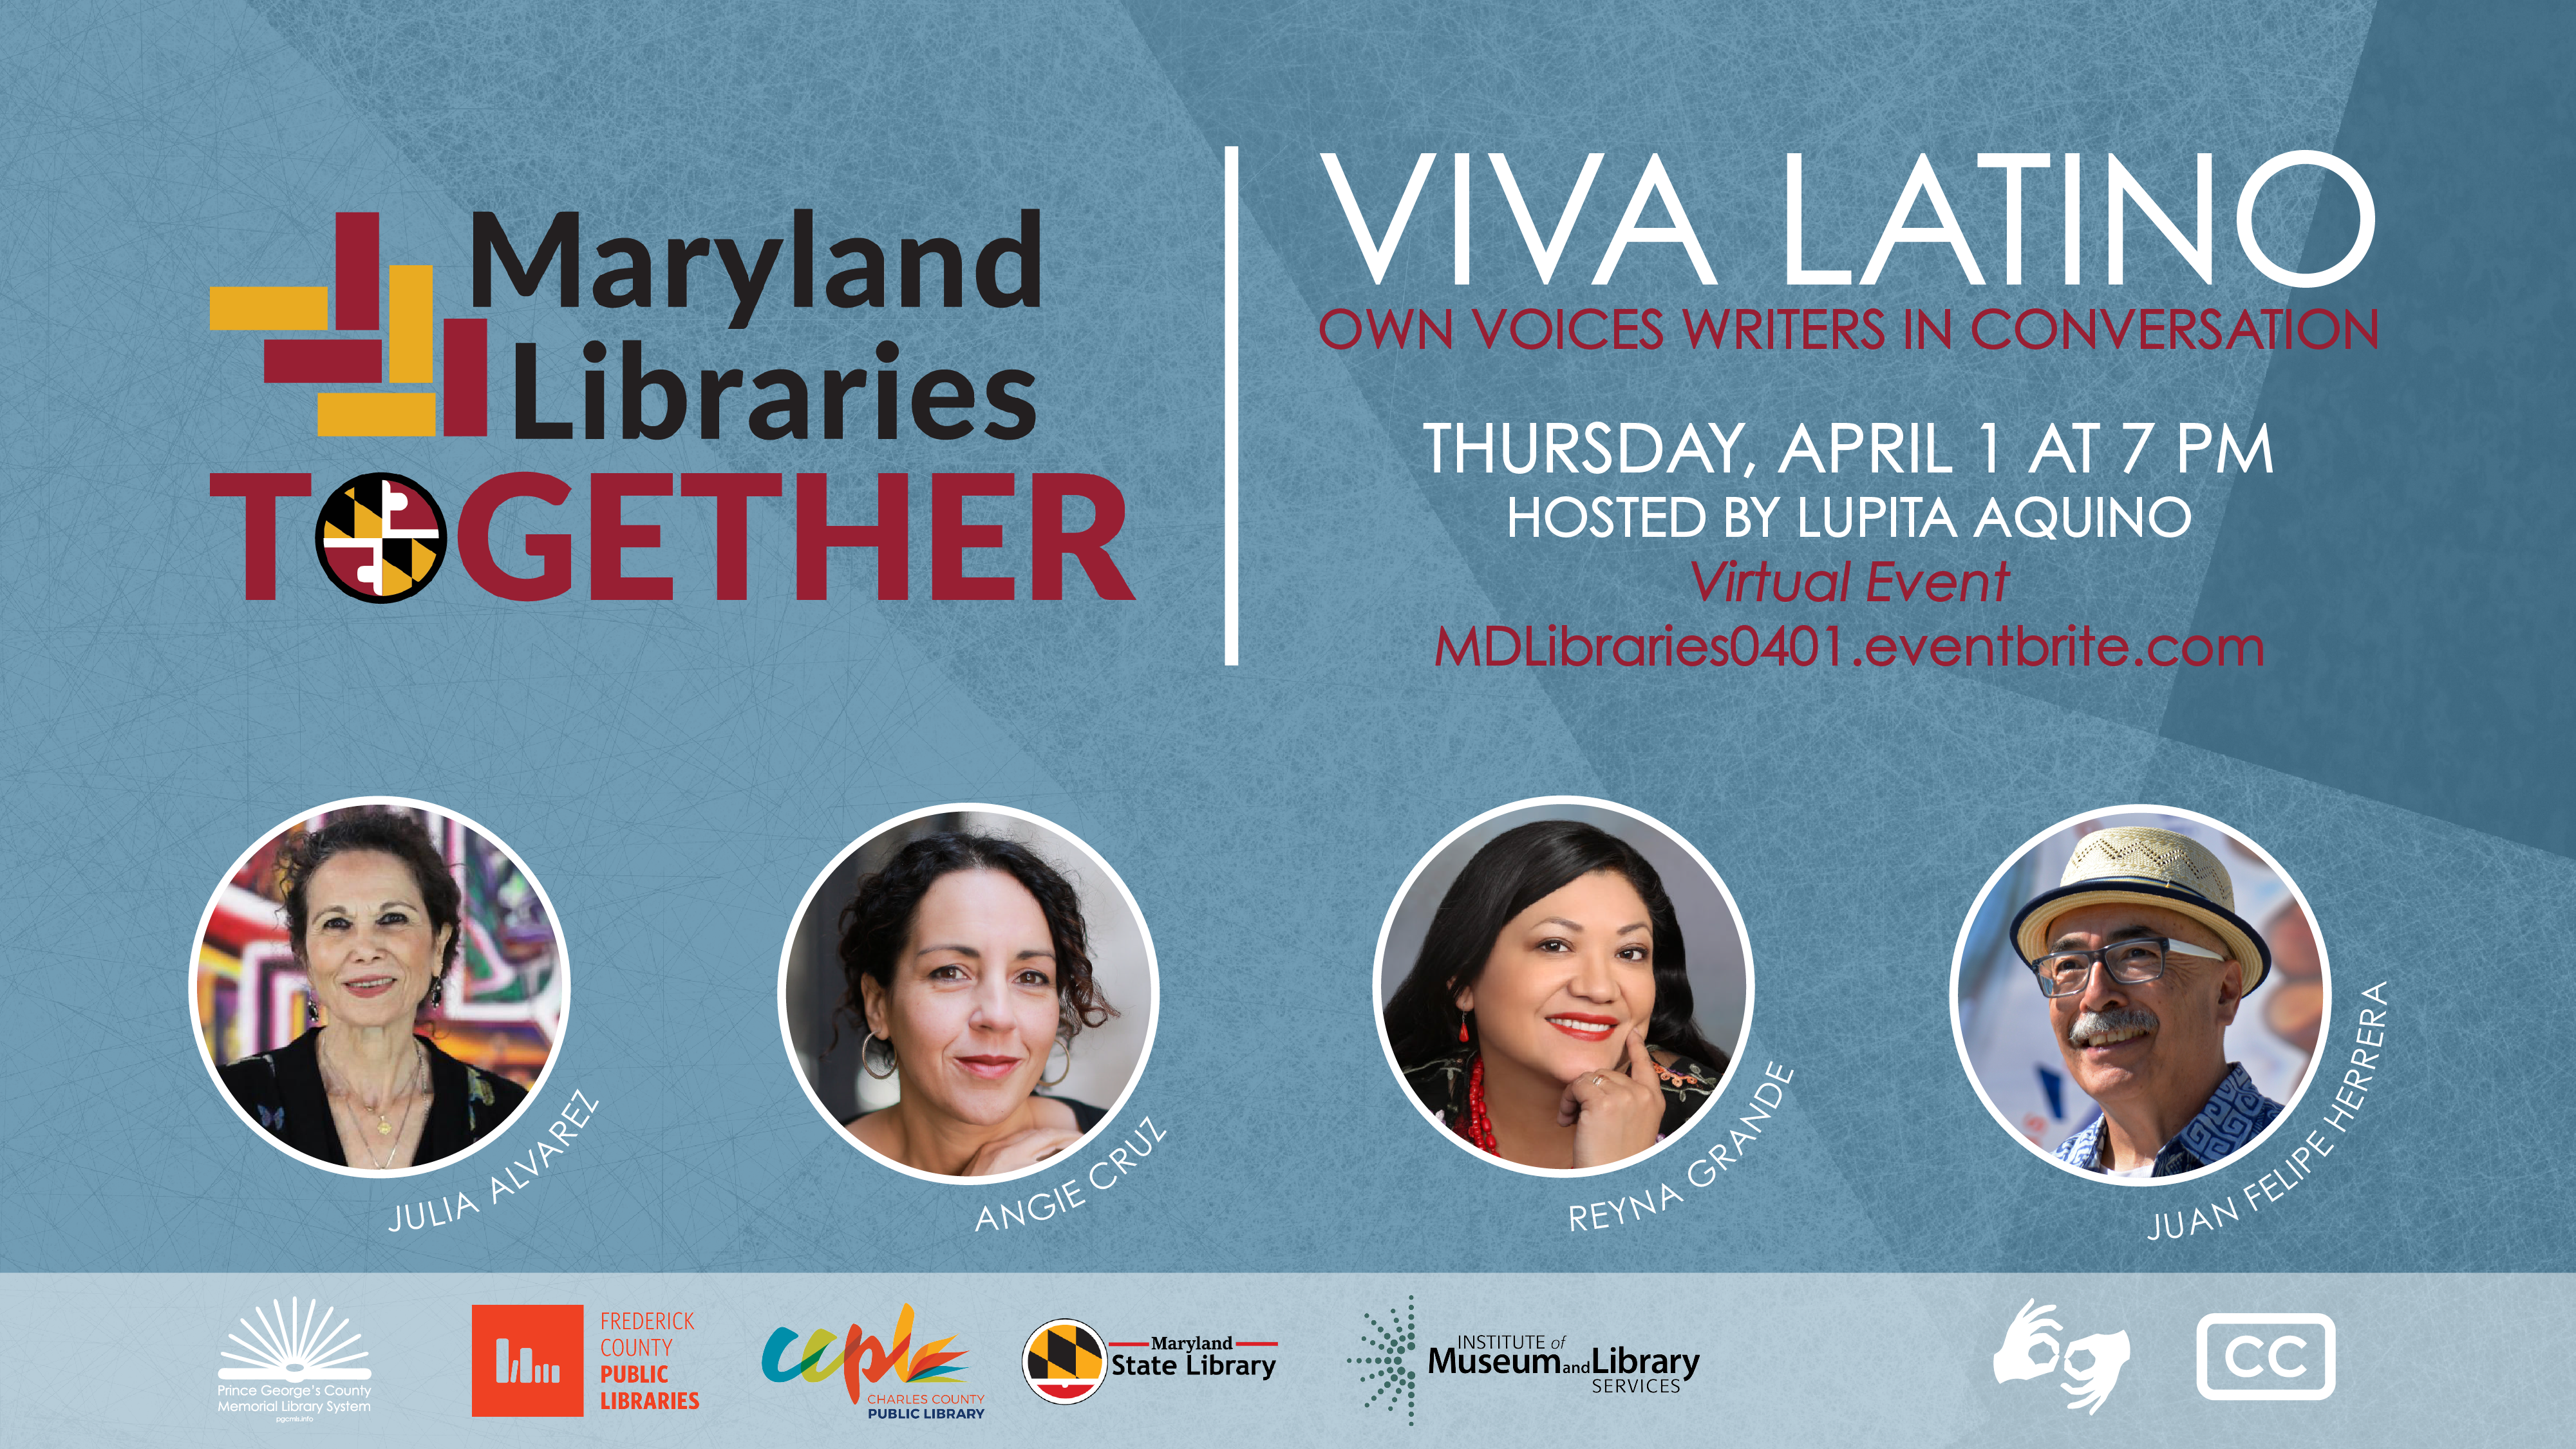 Viva Latino: Own Voices Writers in Conversation graphic.  Library logos, author headshots